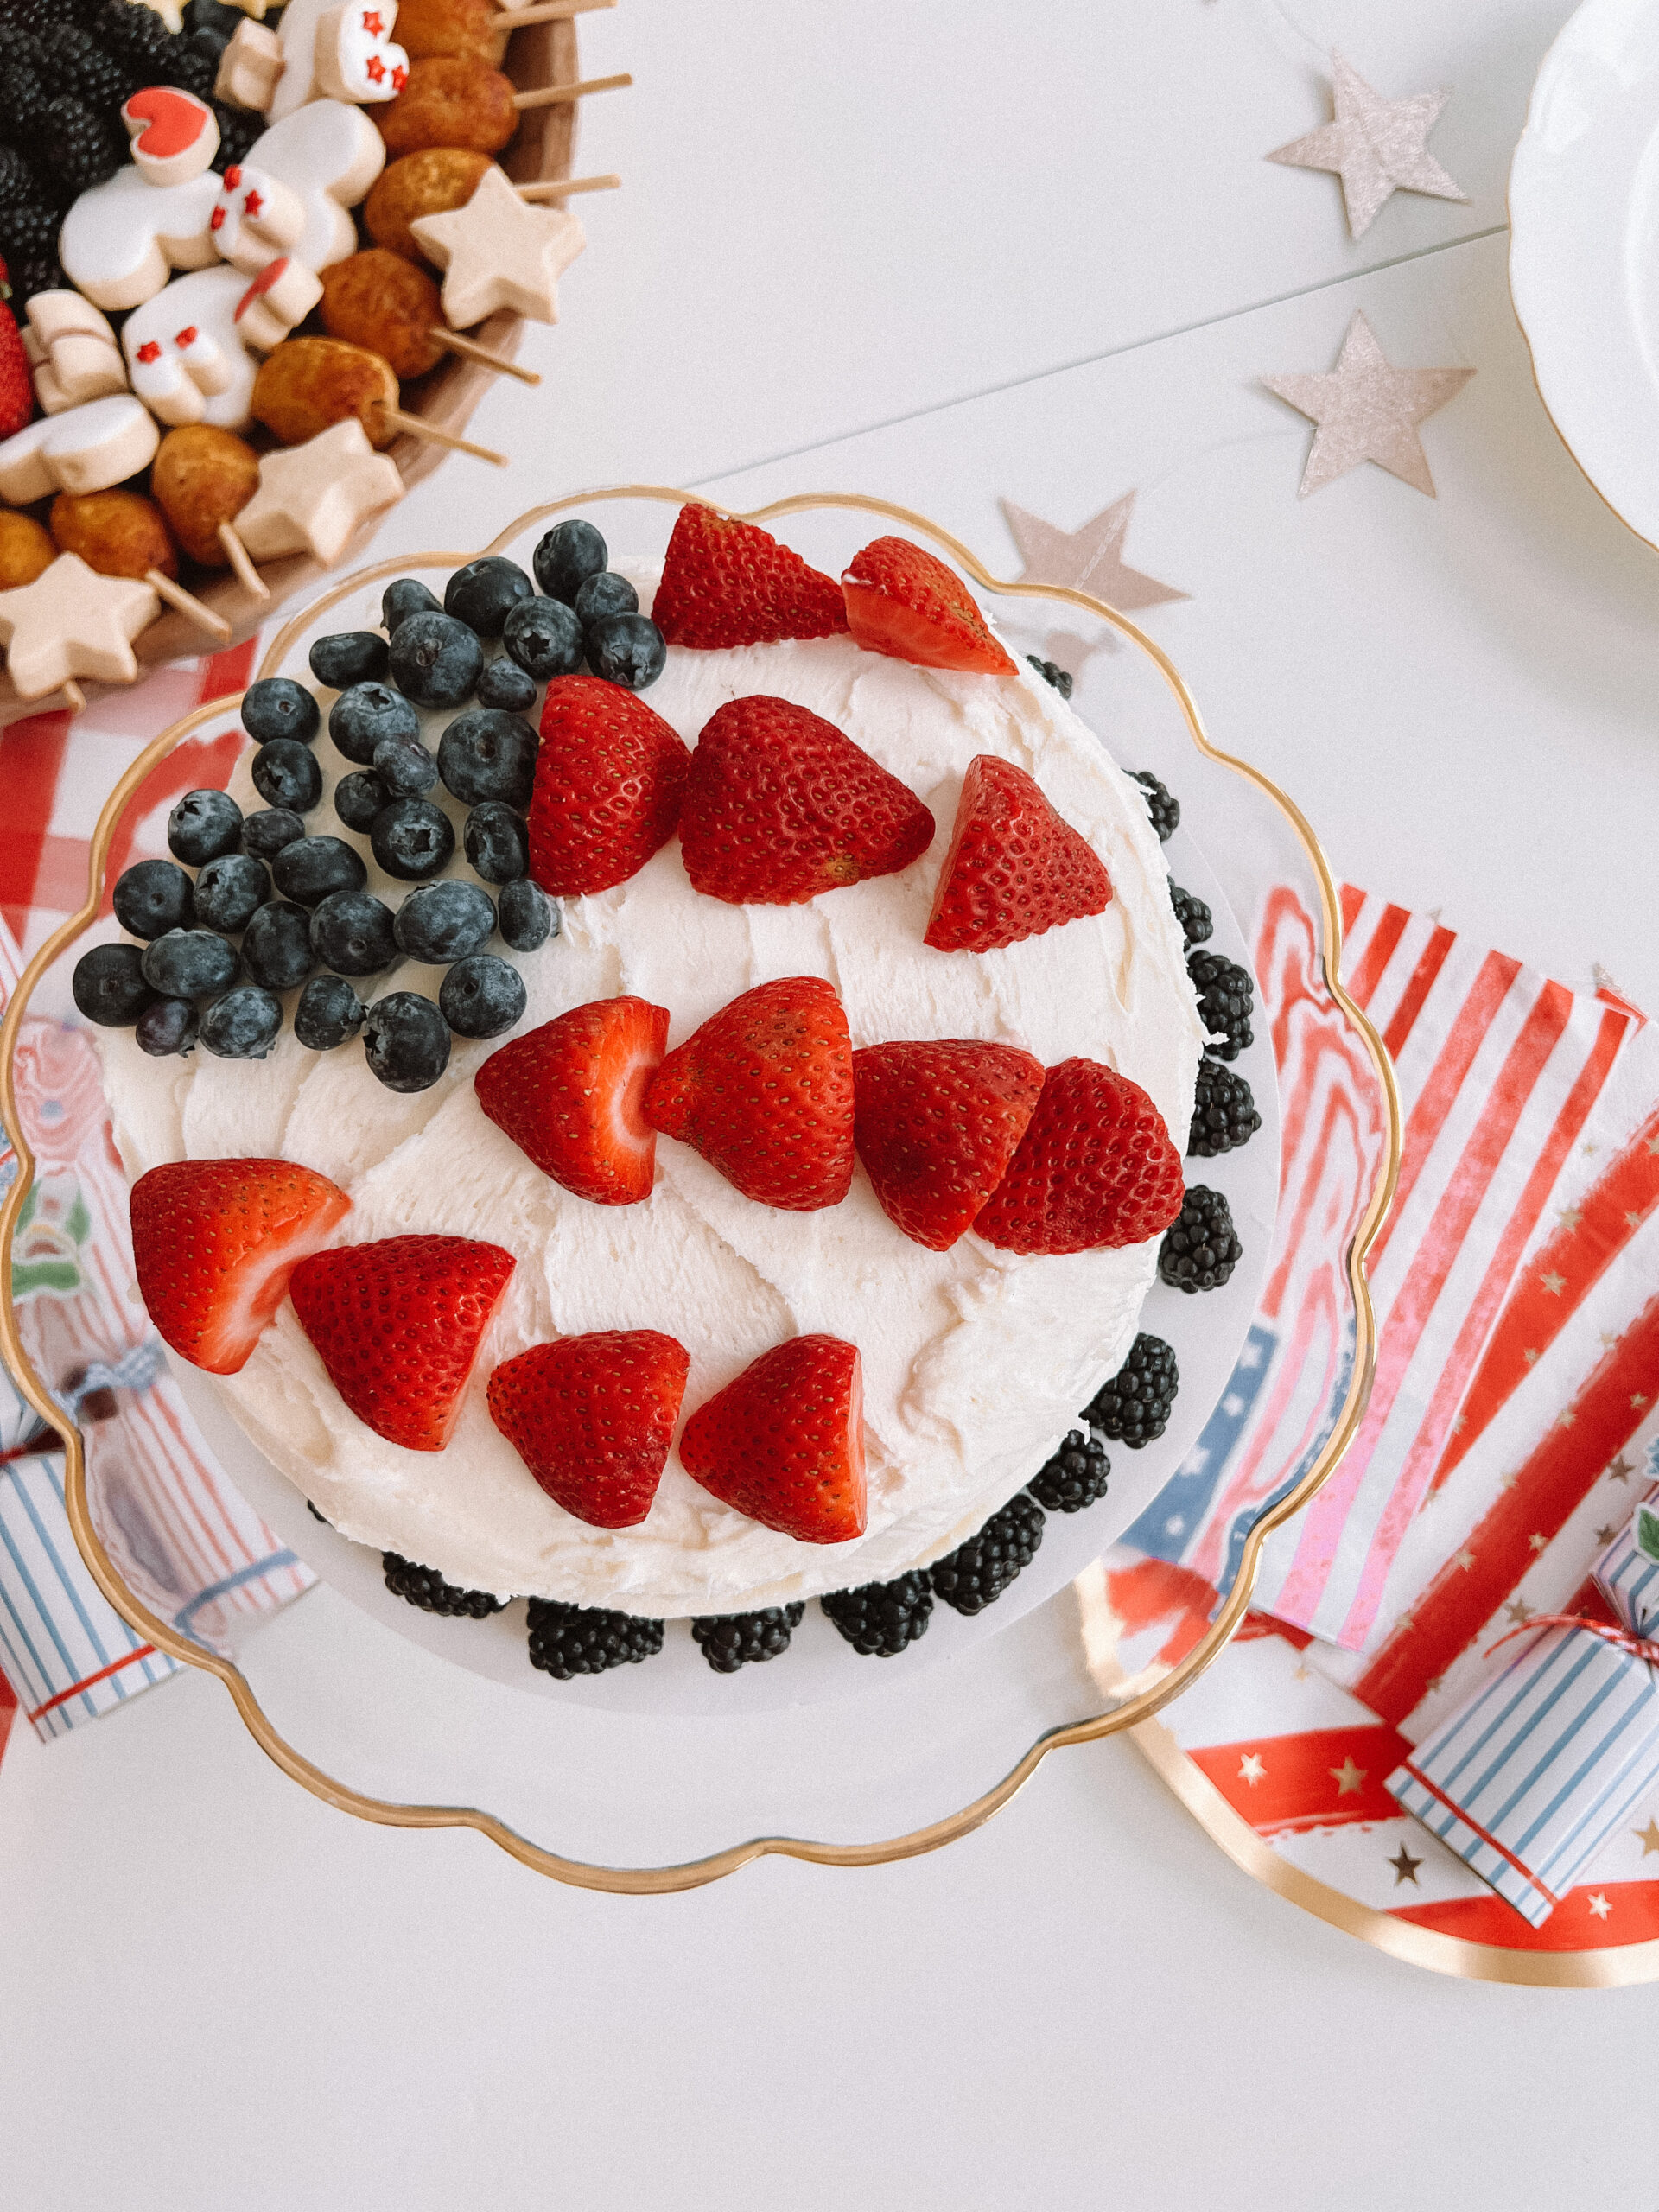 4th of july cake ideas